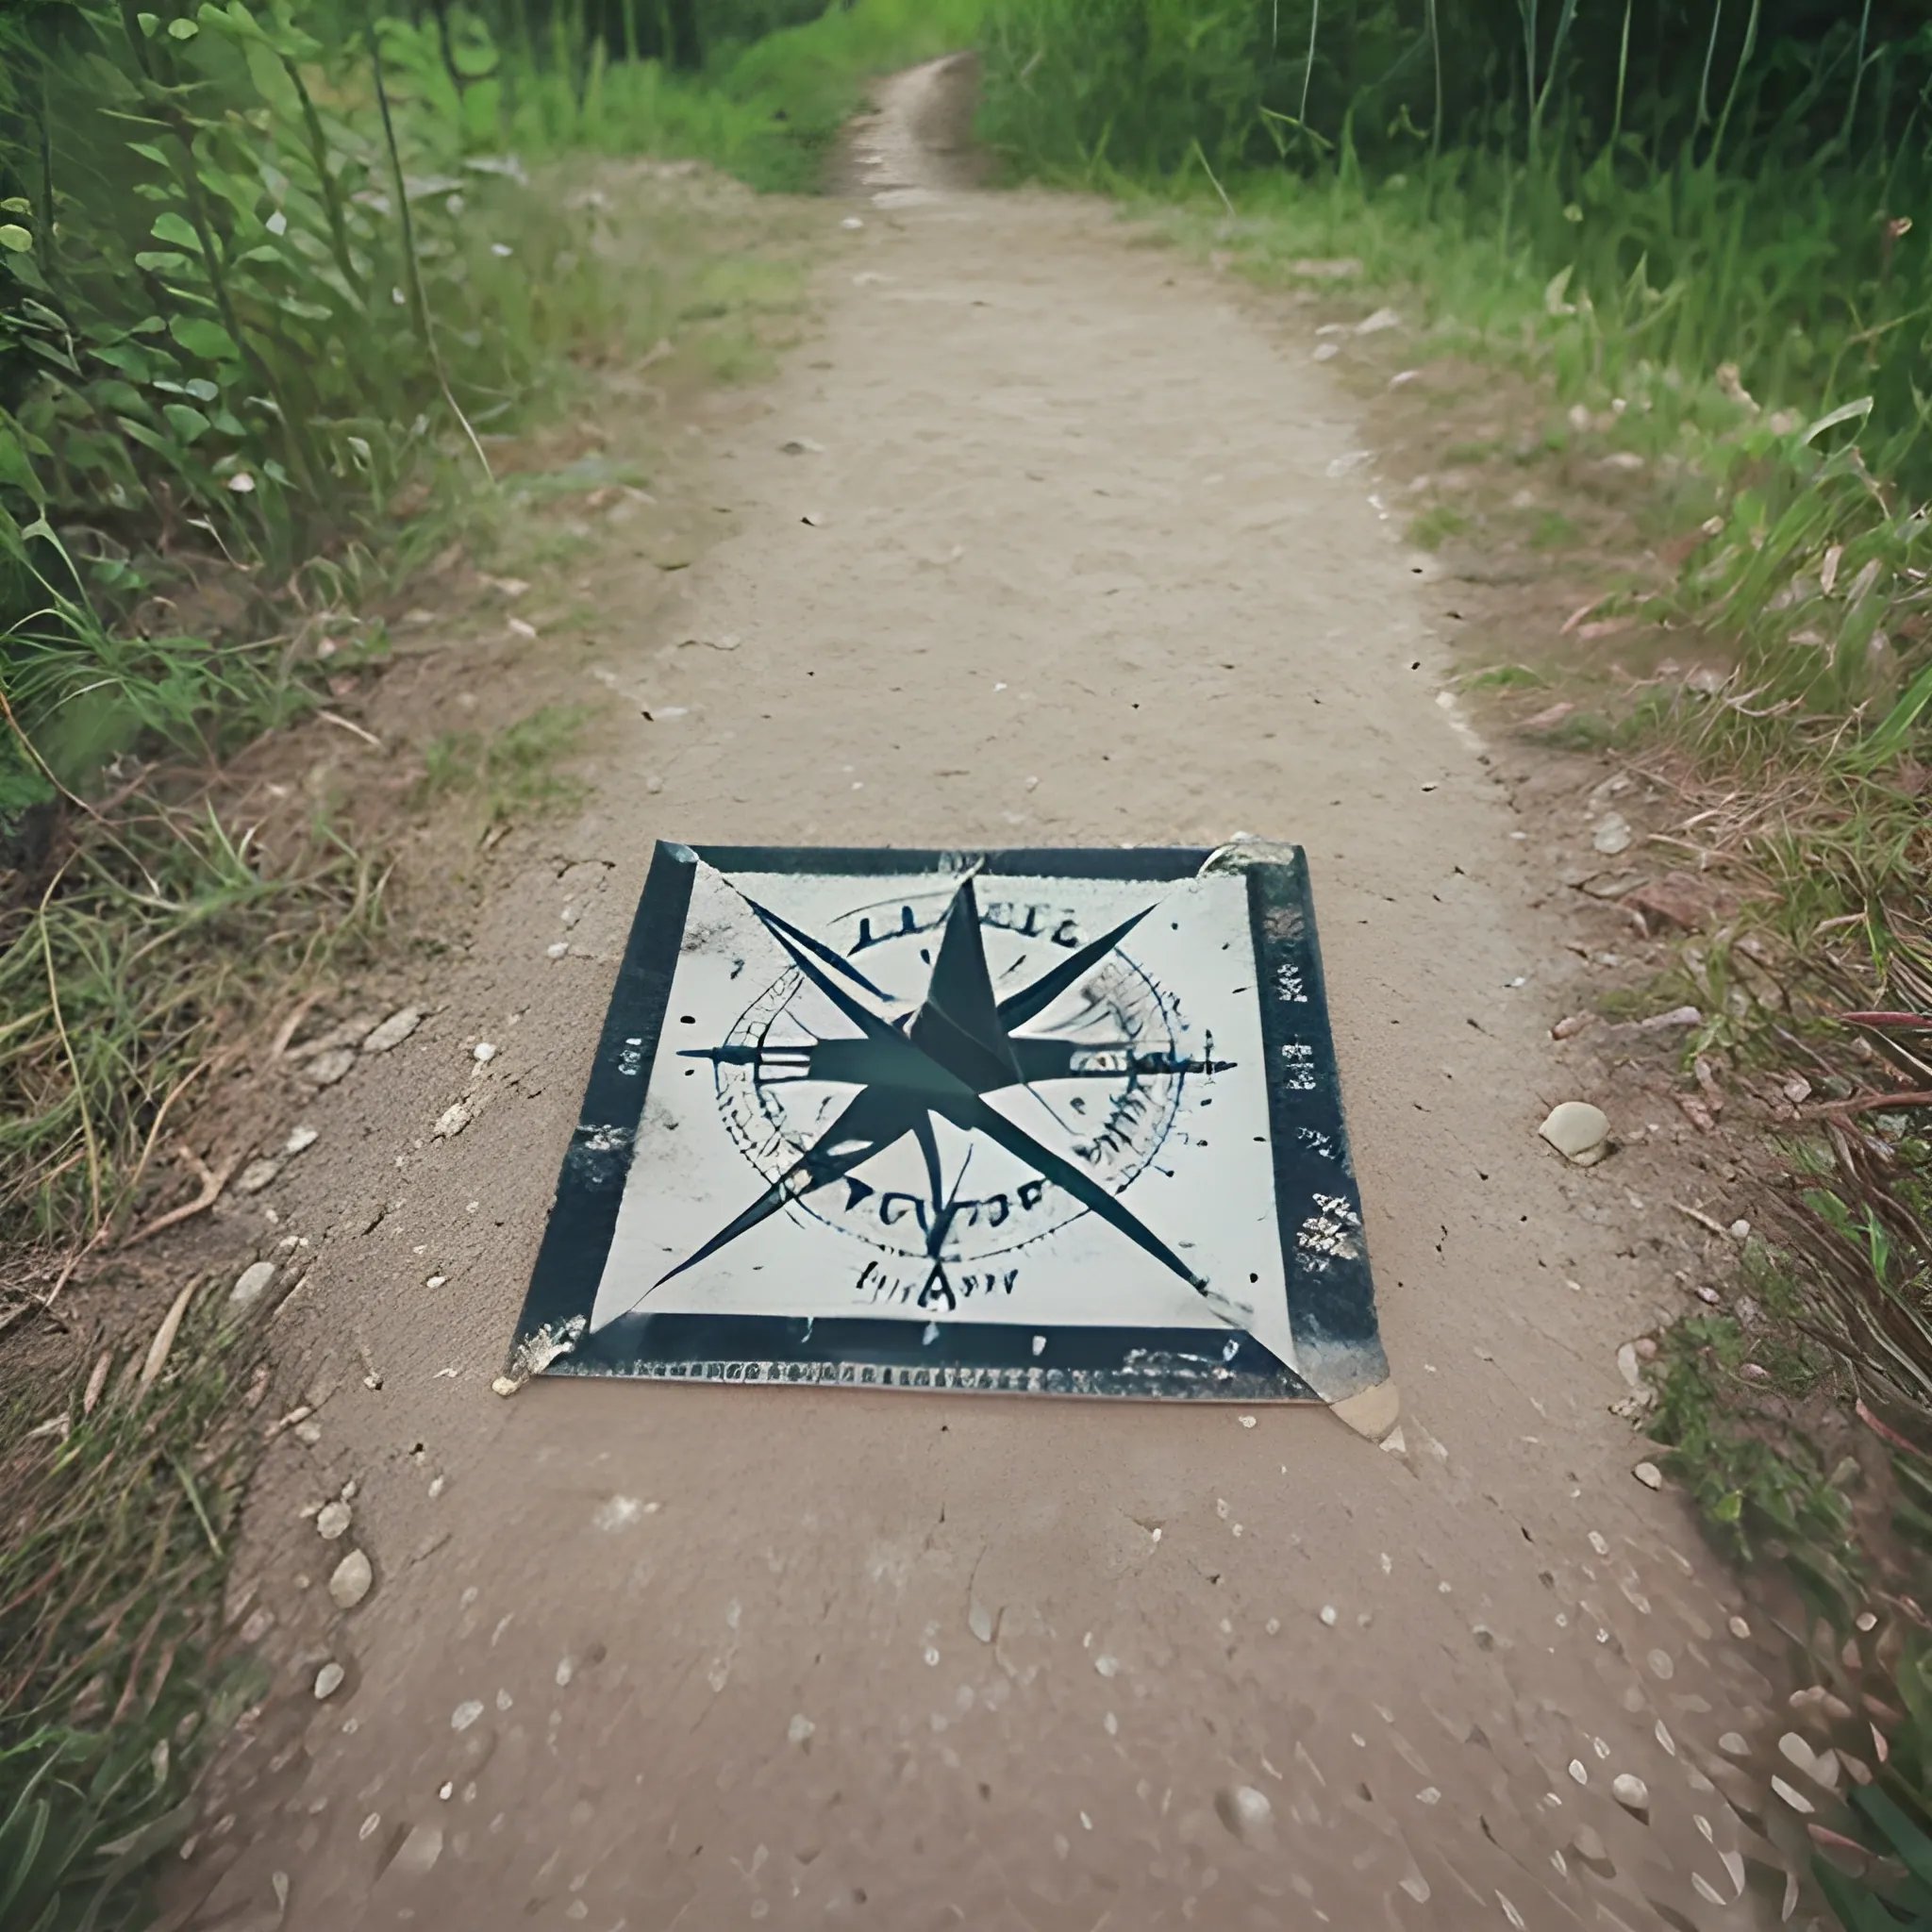 Trail with compass and signs with a converse shoe